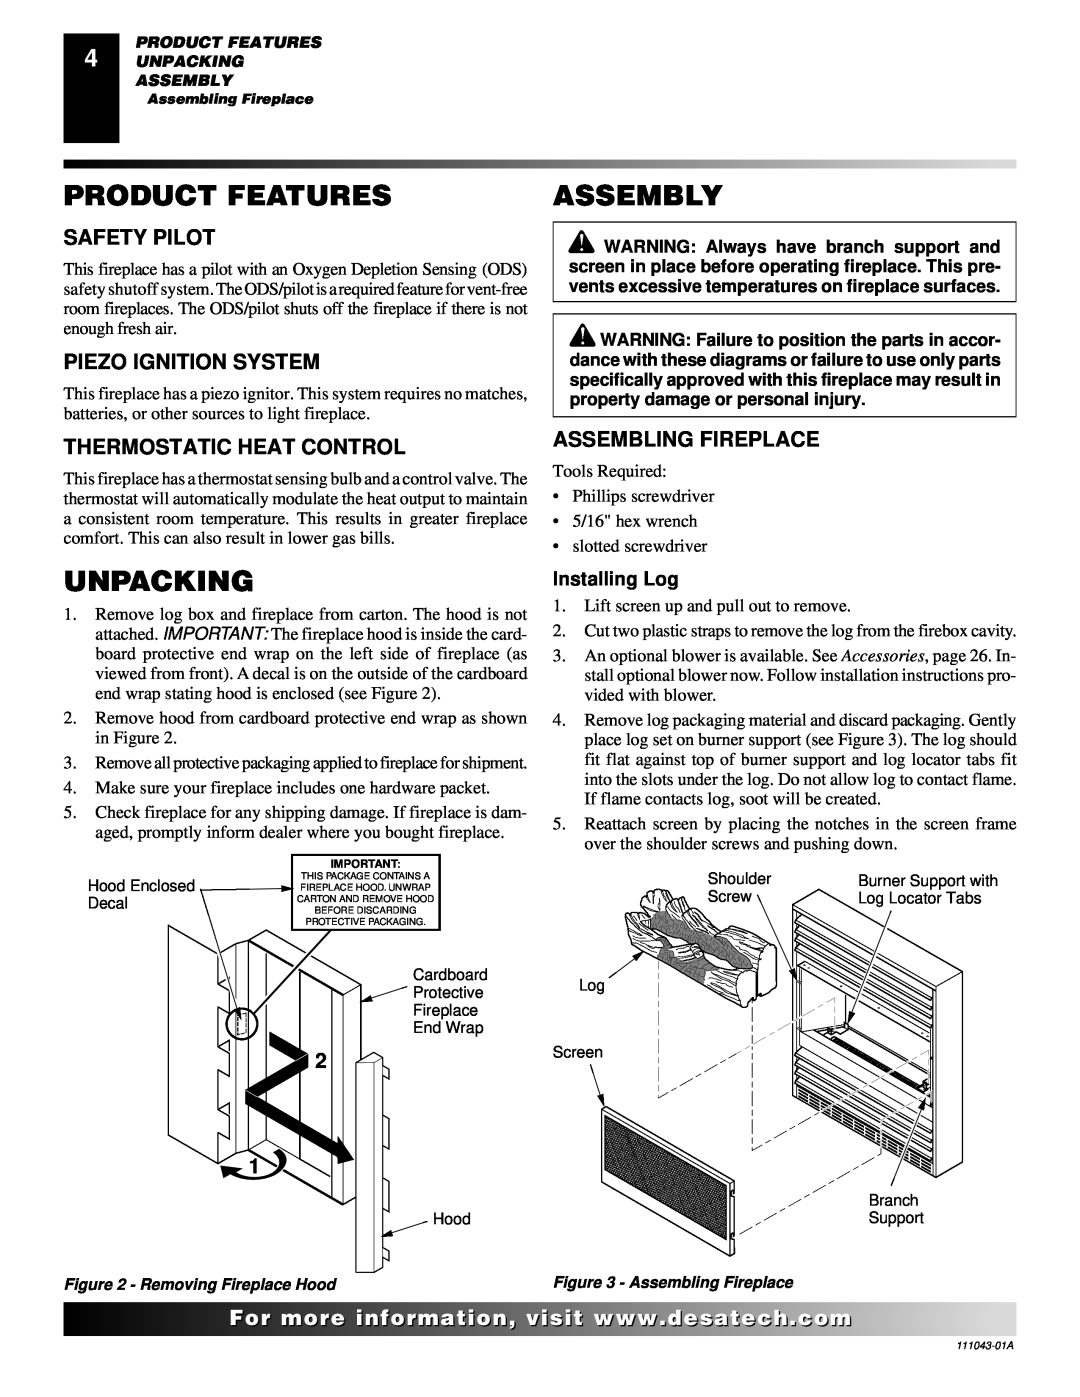 Vanguard Heating WMH26TNB installation manual Product Features, Assembly, Unpacking, Installing Log 